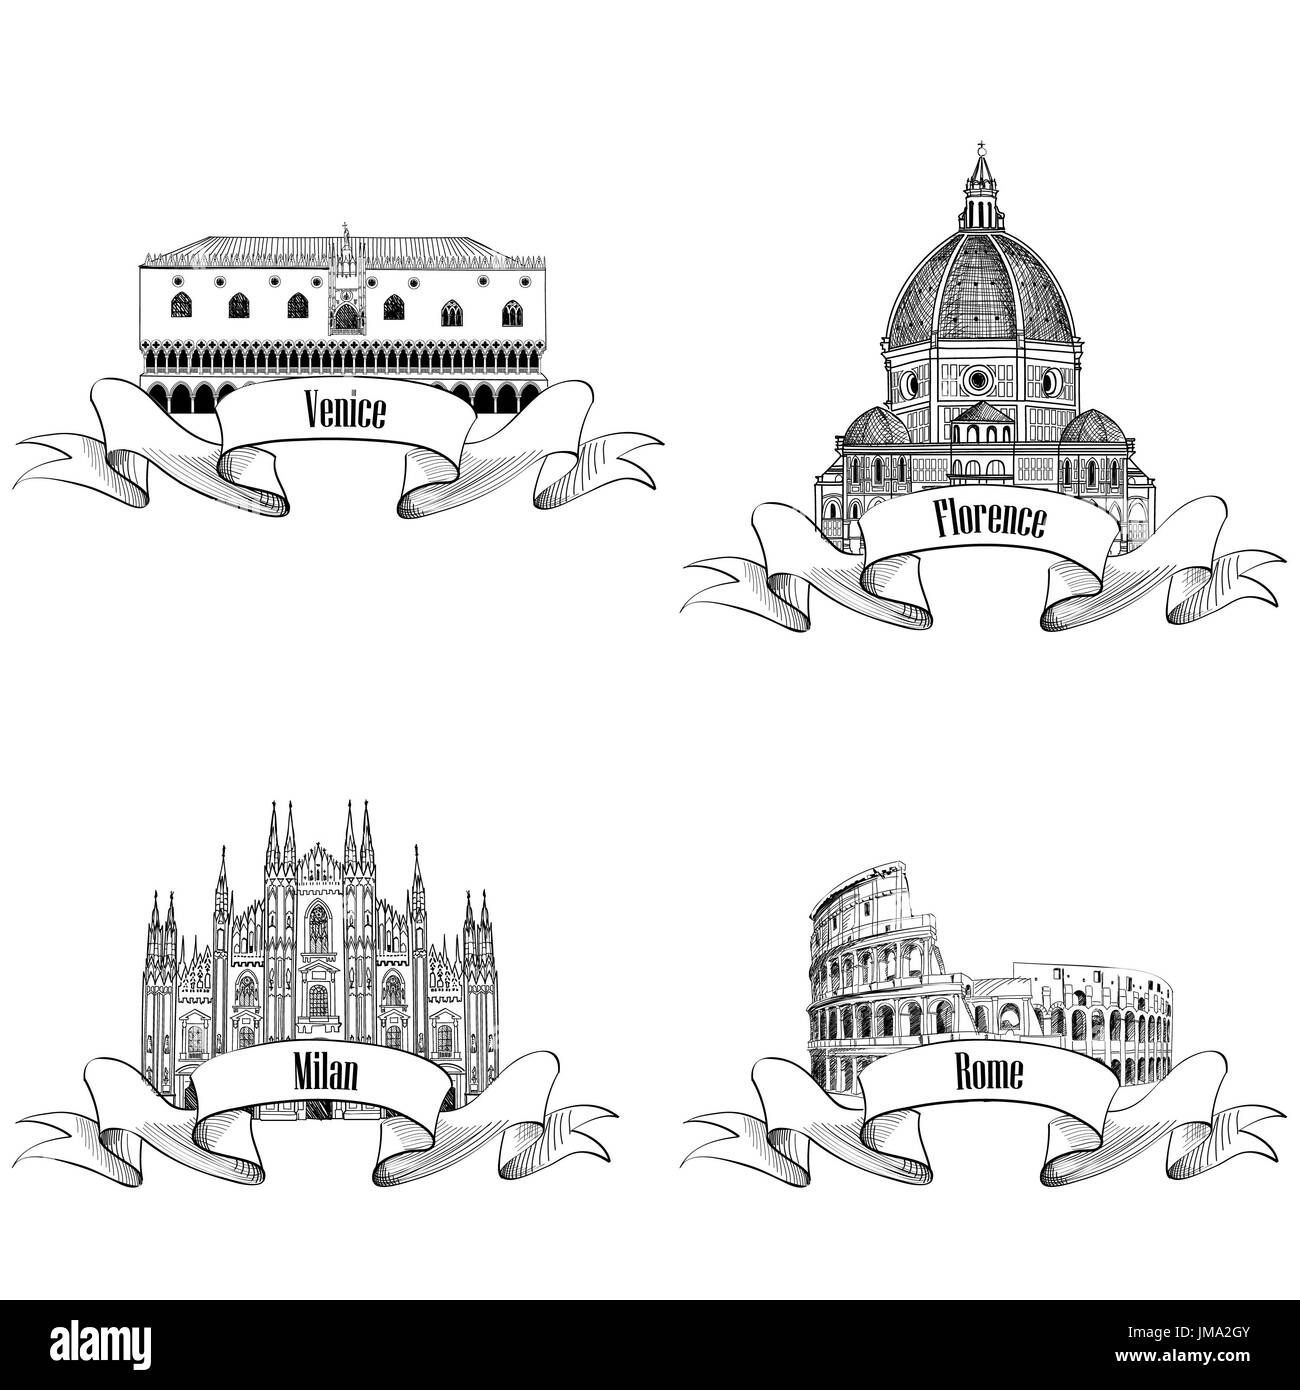 Famous italian city label set: Rome, Milan, Venice, Florence. Landmarks of Italy: Dome cathedral Milan, Doge's palace Venice, Cathedral Santa Maria de Stock Photo